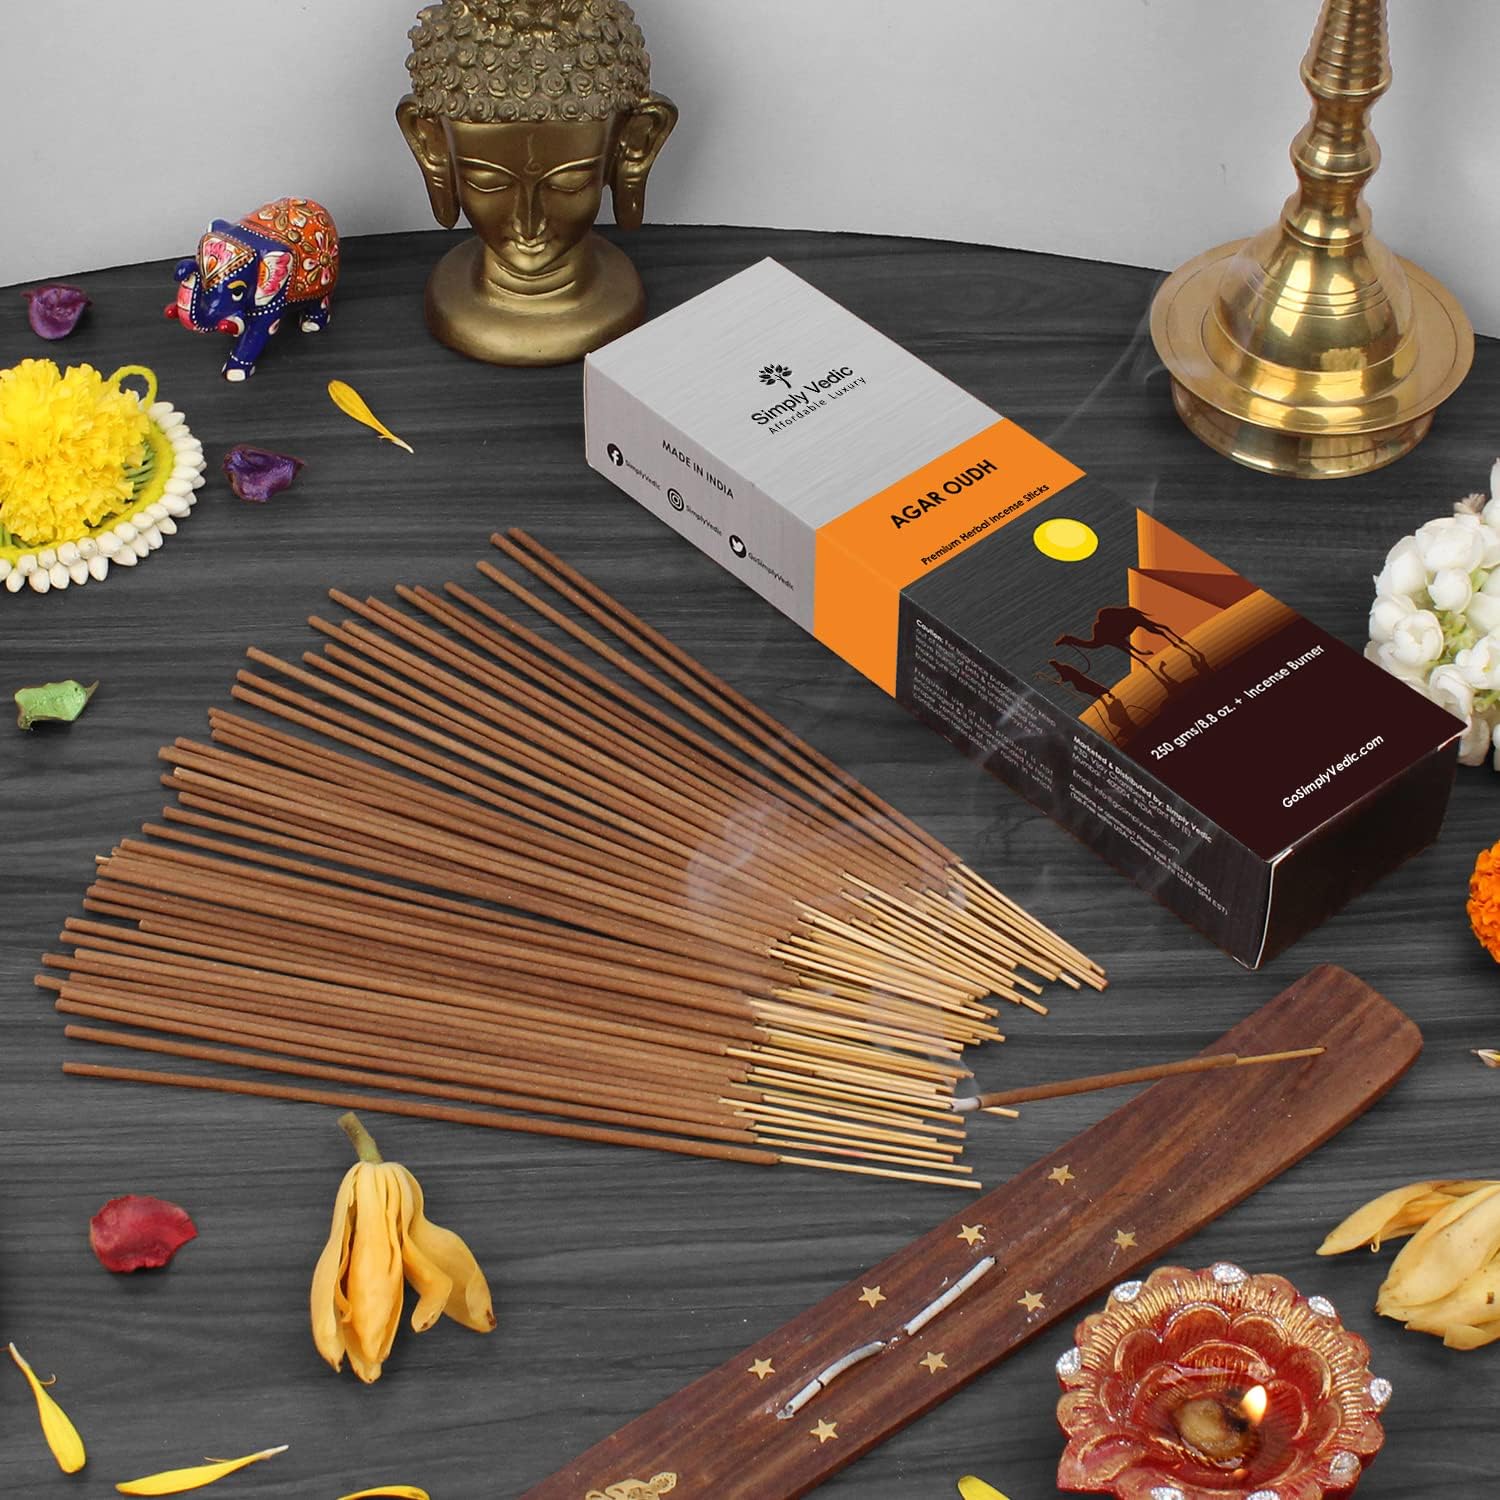 Simply Vedic Agar Oudh Agarbatti 250-Grams (Approx 135 Premium Incense Stick + Incense Holder)| Lasts 45-Minutes, Ideal for Meditation, Yoga, Spiritual Healing, Prayers, Aromatherapy Energy Cleansing